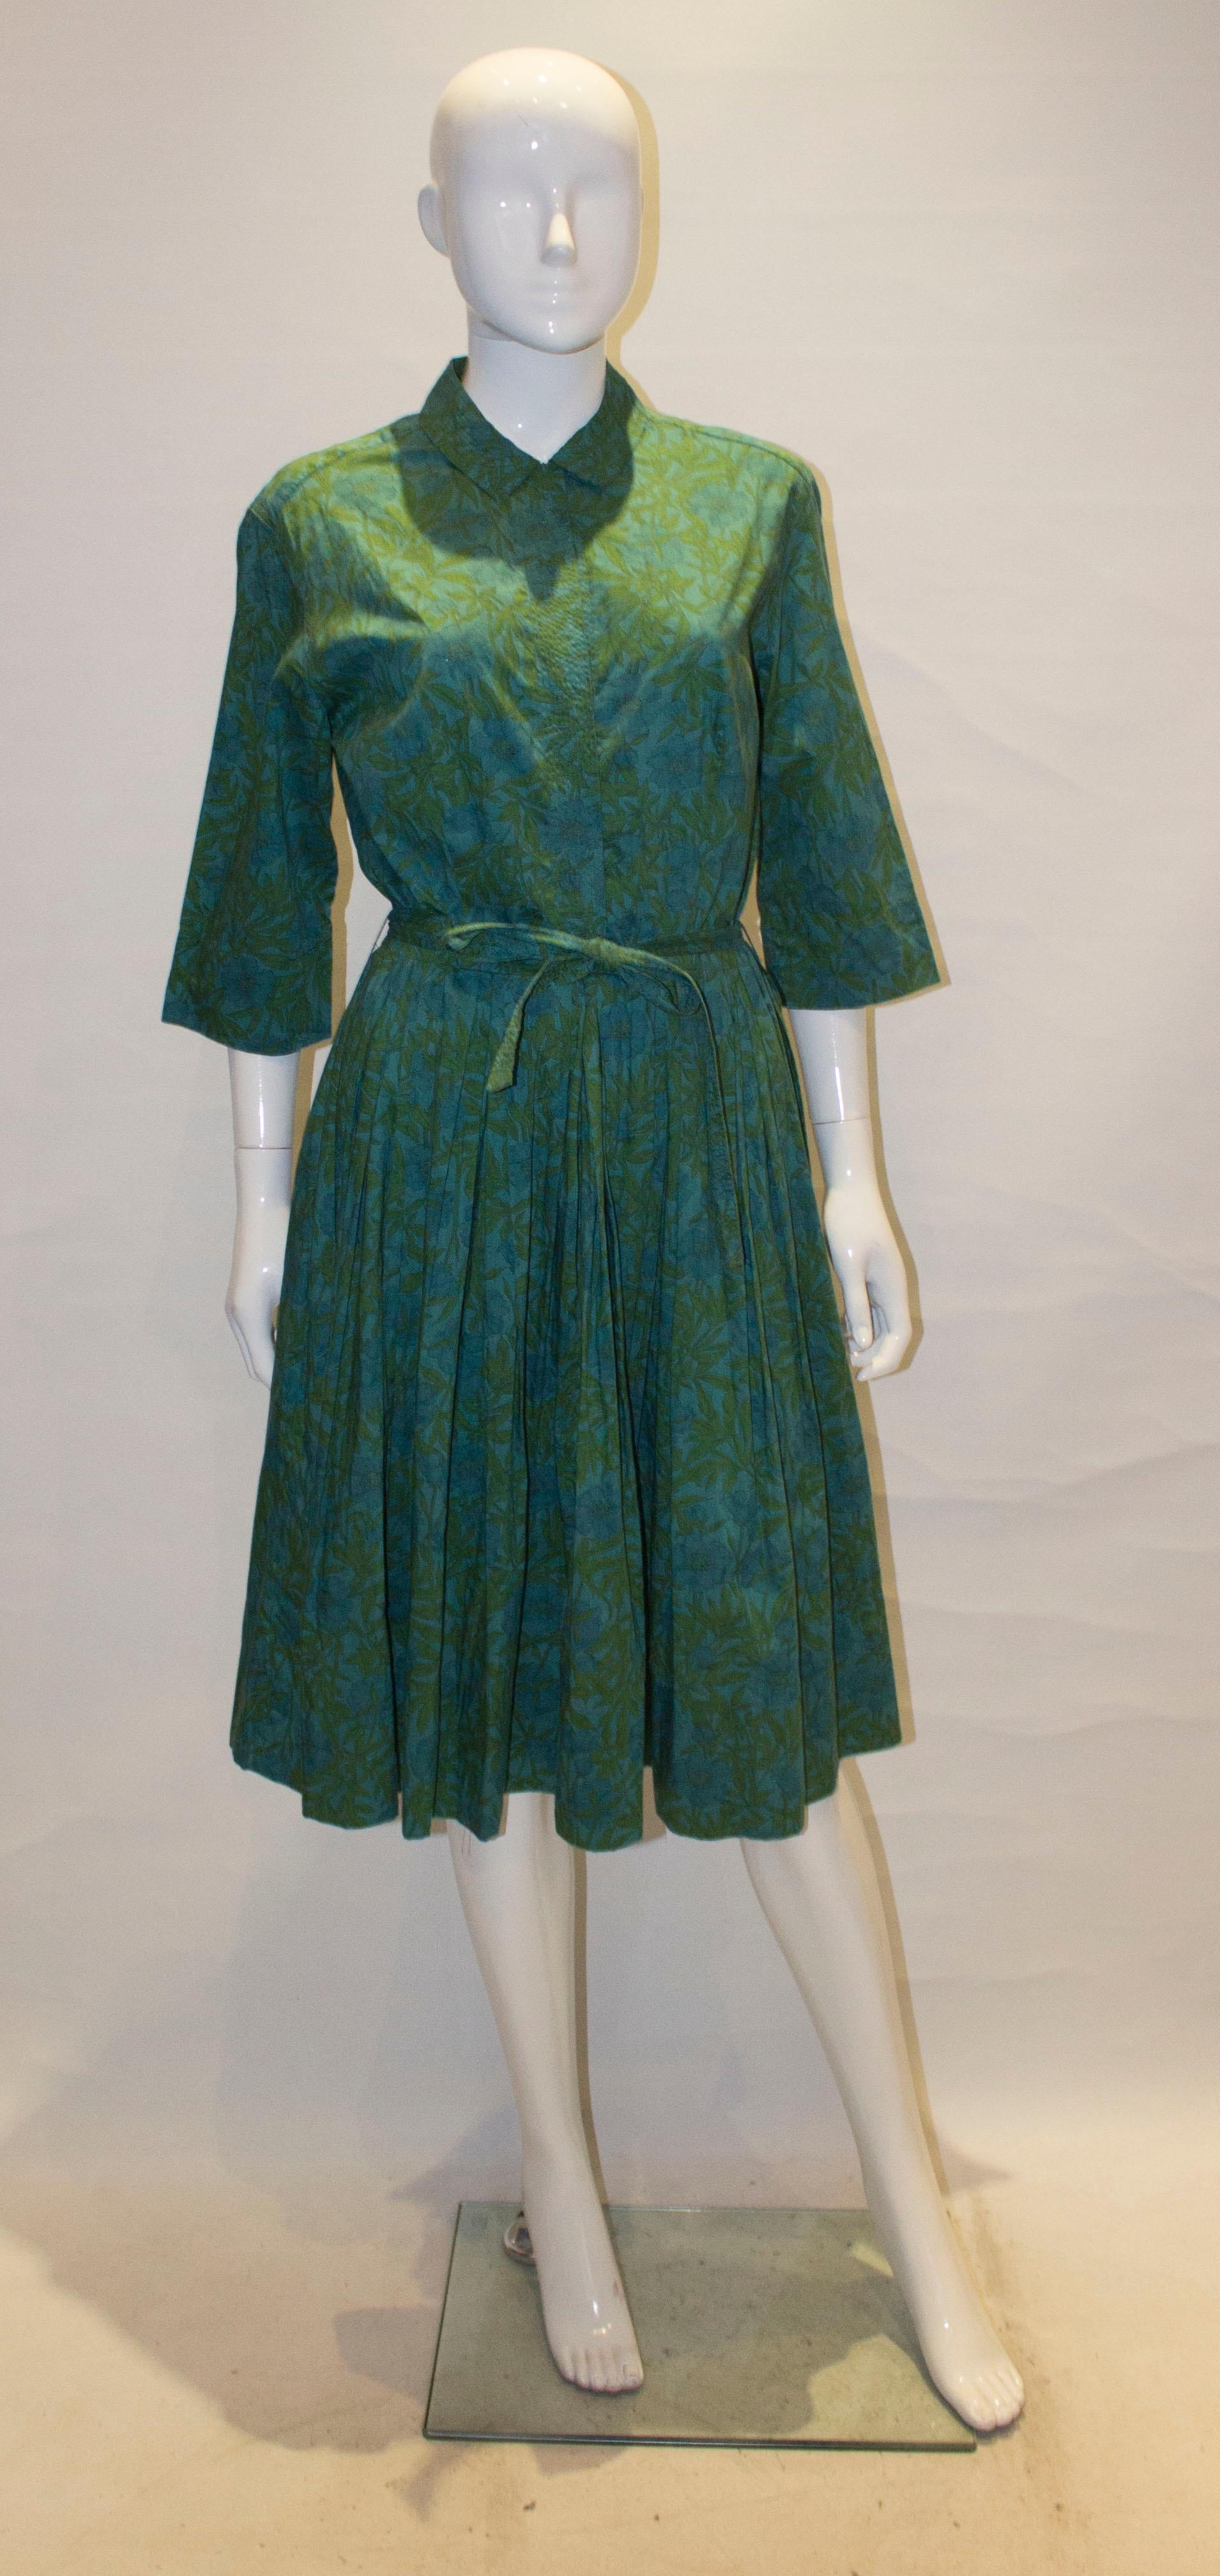 A lovely vintage dress by Best an Co, 5th Avenue.  The dress is in a green and blue floral print  with stitch detail on the collar. It has a three button front opening , with a hook and eye fastening at the waist. The dress has elbow length sleeves,